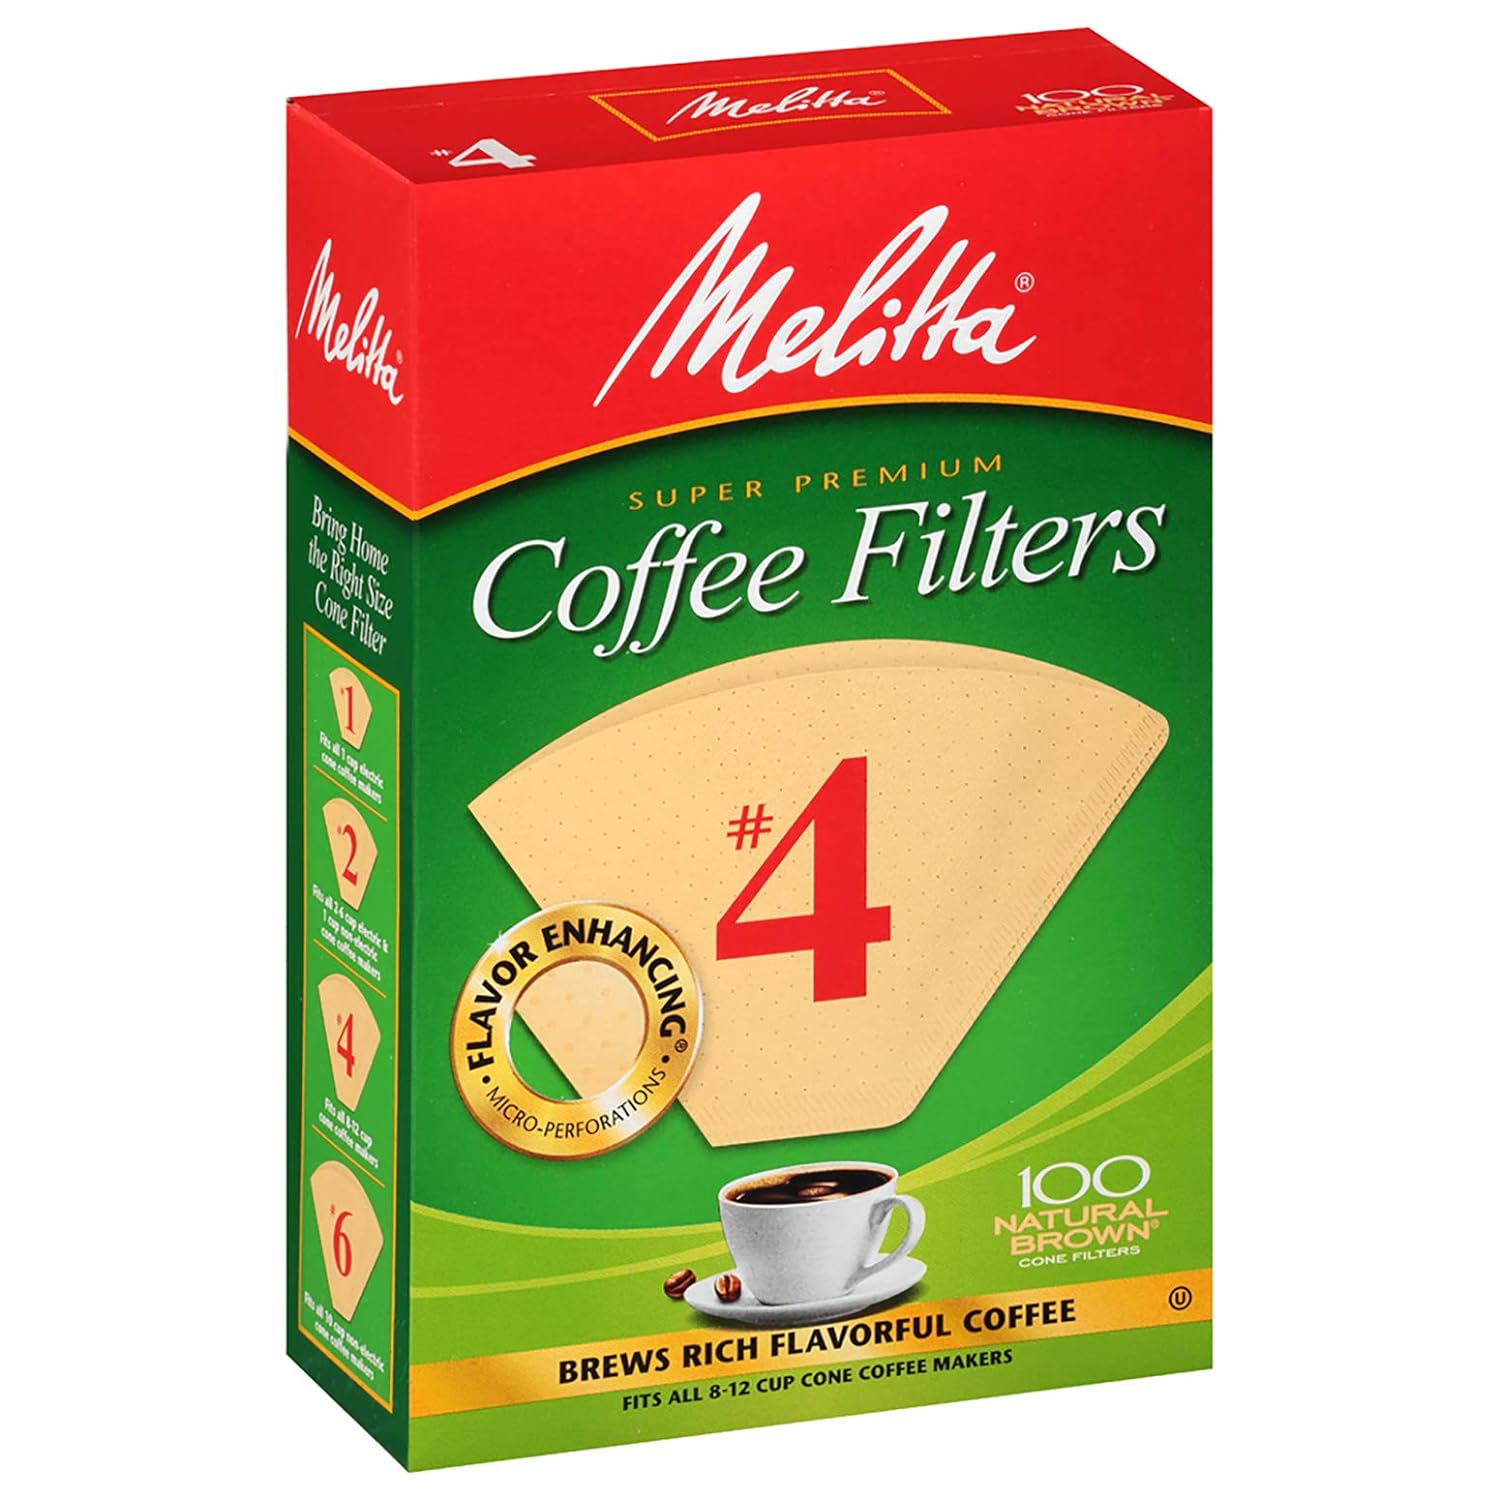 Melitta #6 Cone Coffee Filters, Unbleached Natural Brown, 40 Count (Pack of 12) 480 Total Filters Count - Packaging May Vary